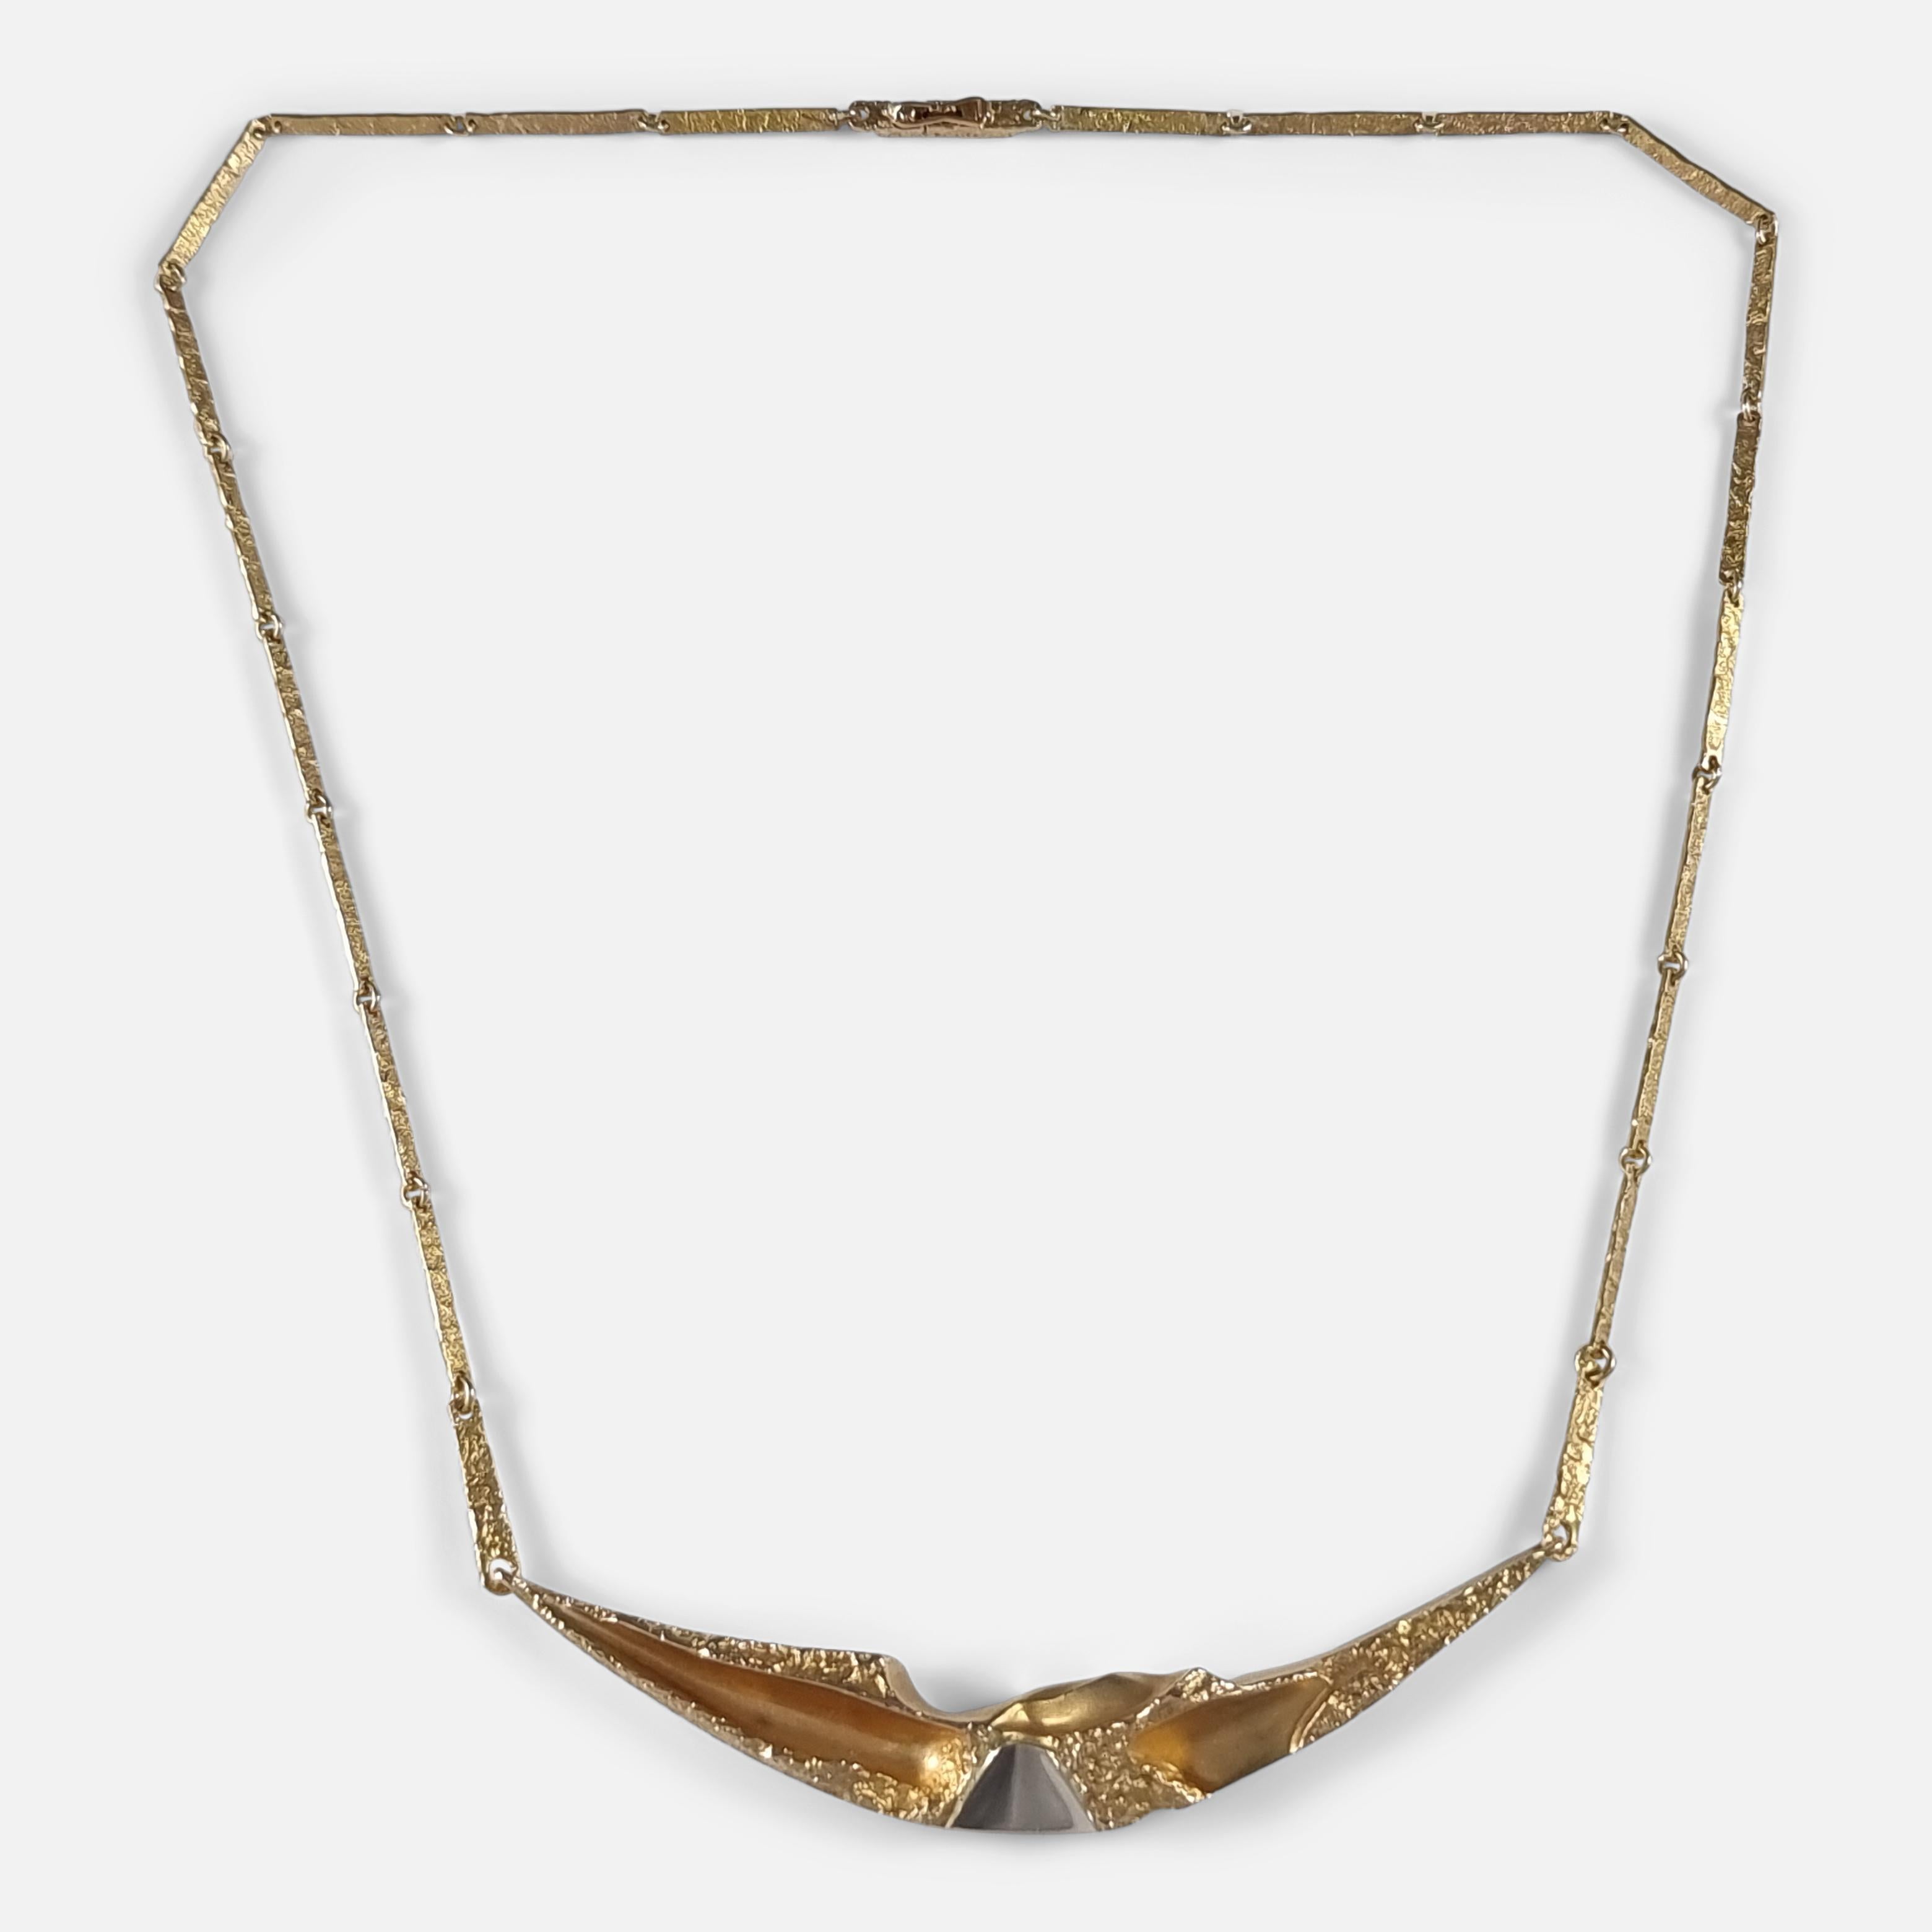 A Finnish 14ct yellow and white gold necklace designed by Björn Weckström for Lapponia. 

Hallmarked with the common control mark '585' indicating 14 carat gold, the makers icon mark of Lapponia, and Finnish date mark 'L8' for 1988.

Period: - Late